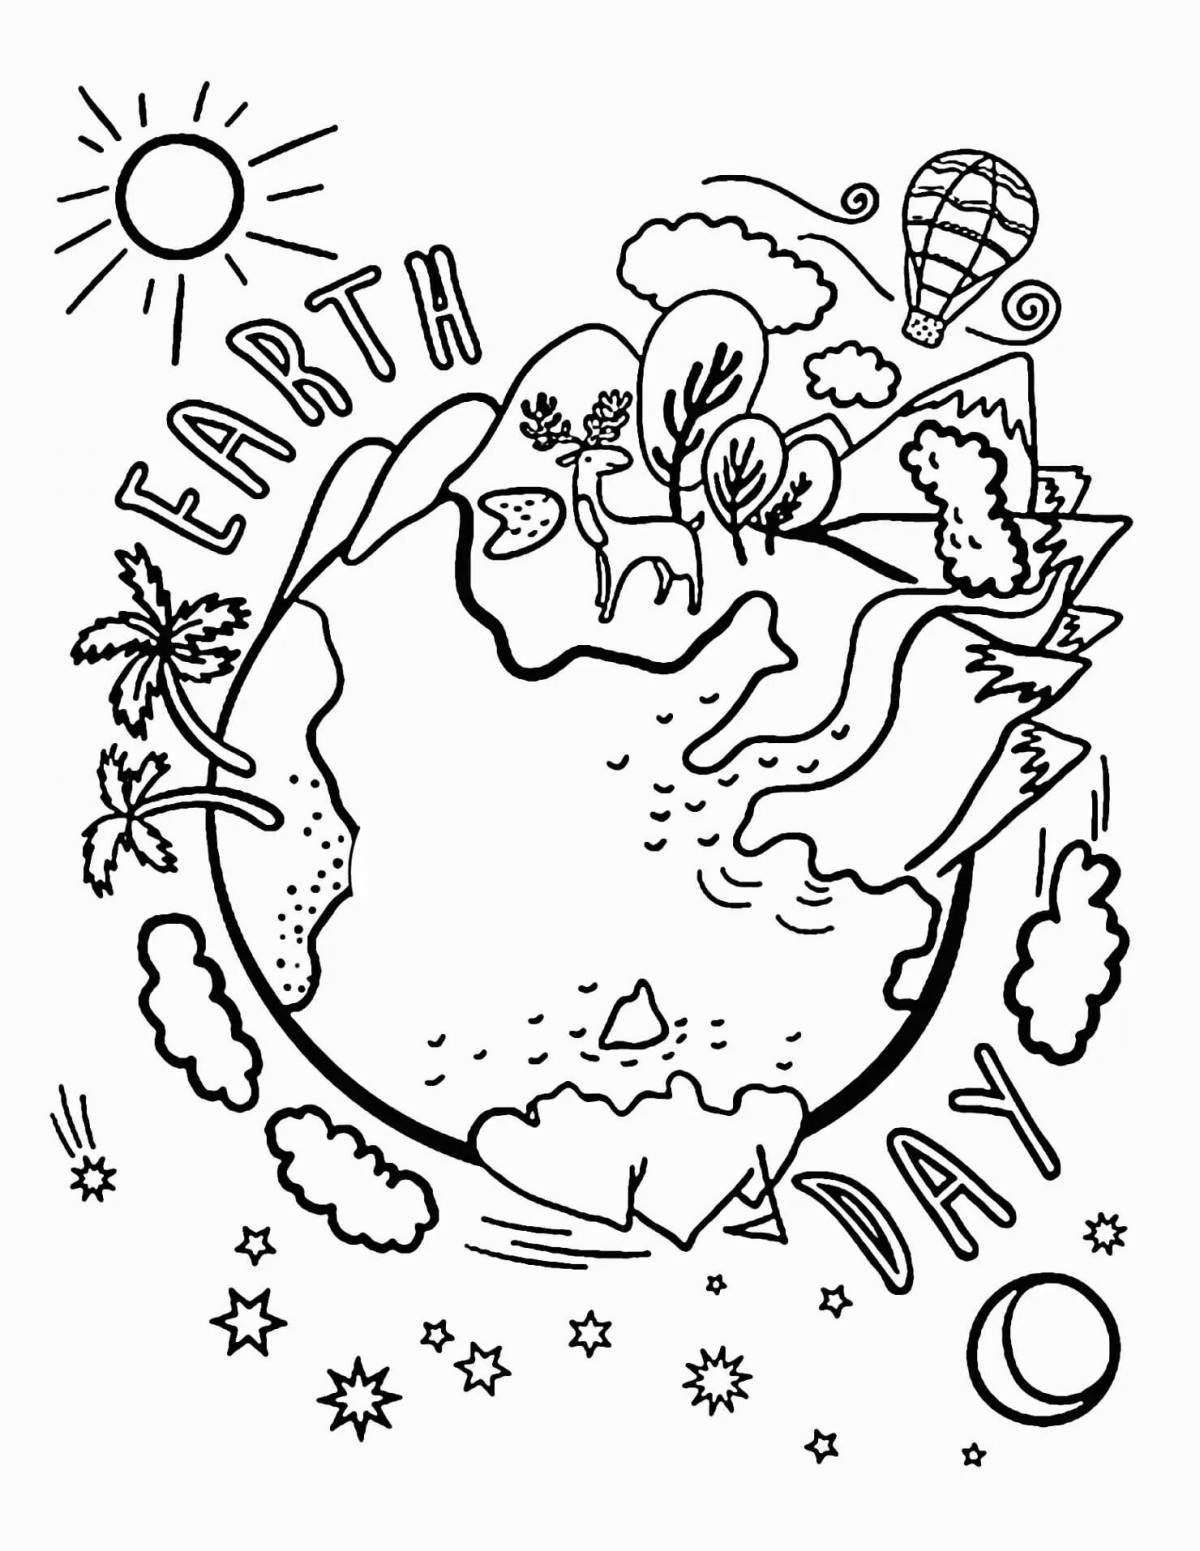 Save nature poster shiny coloring page